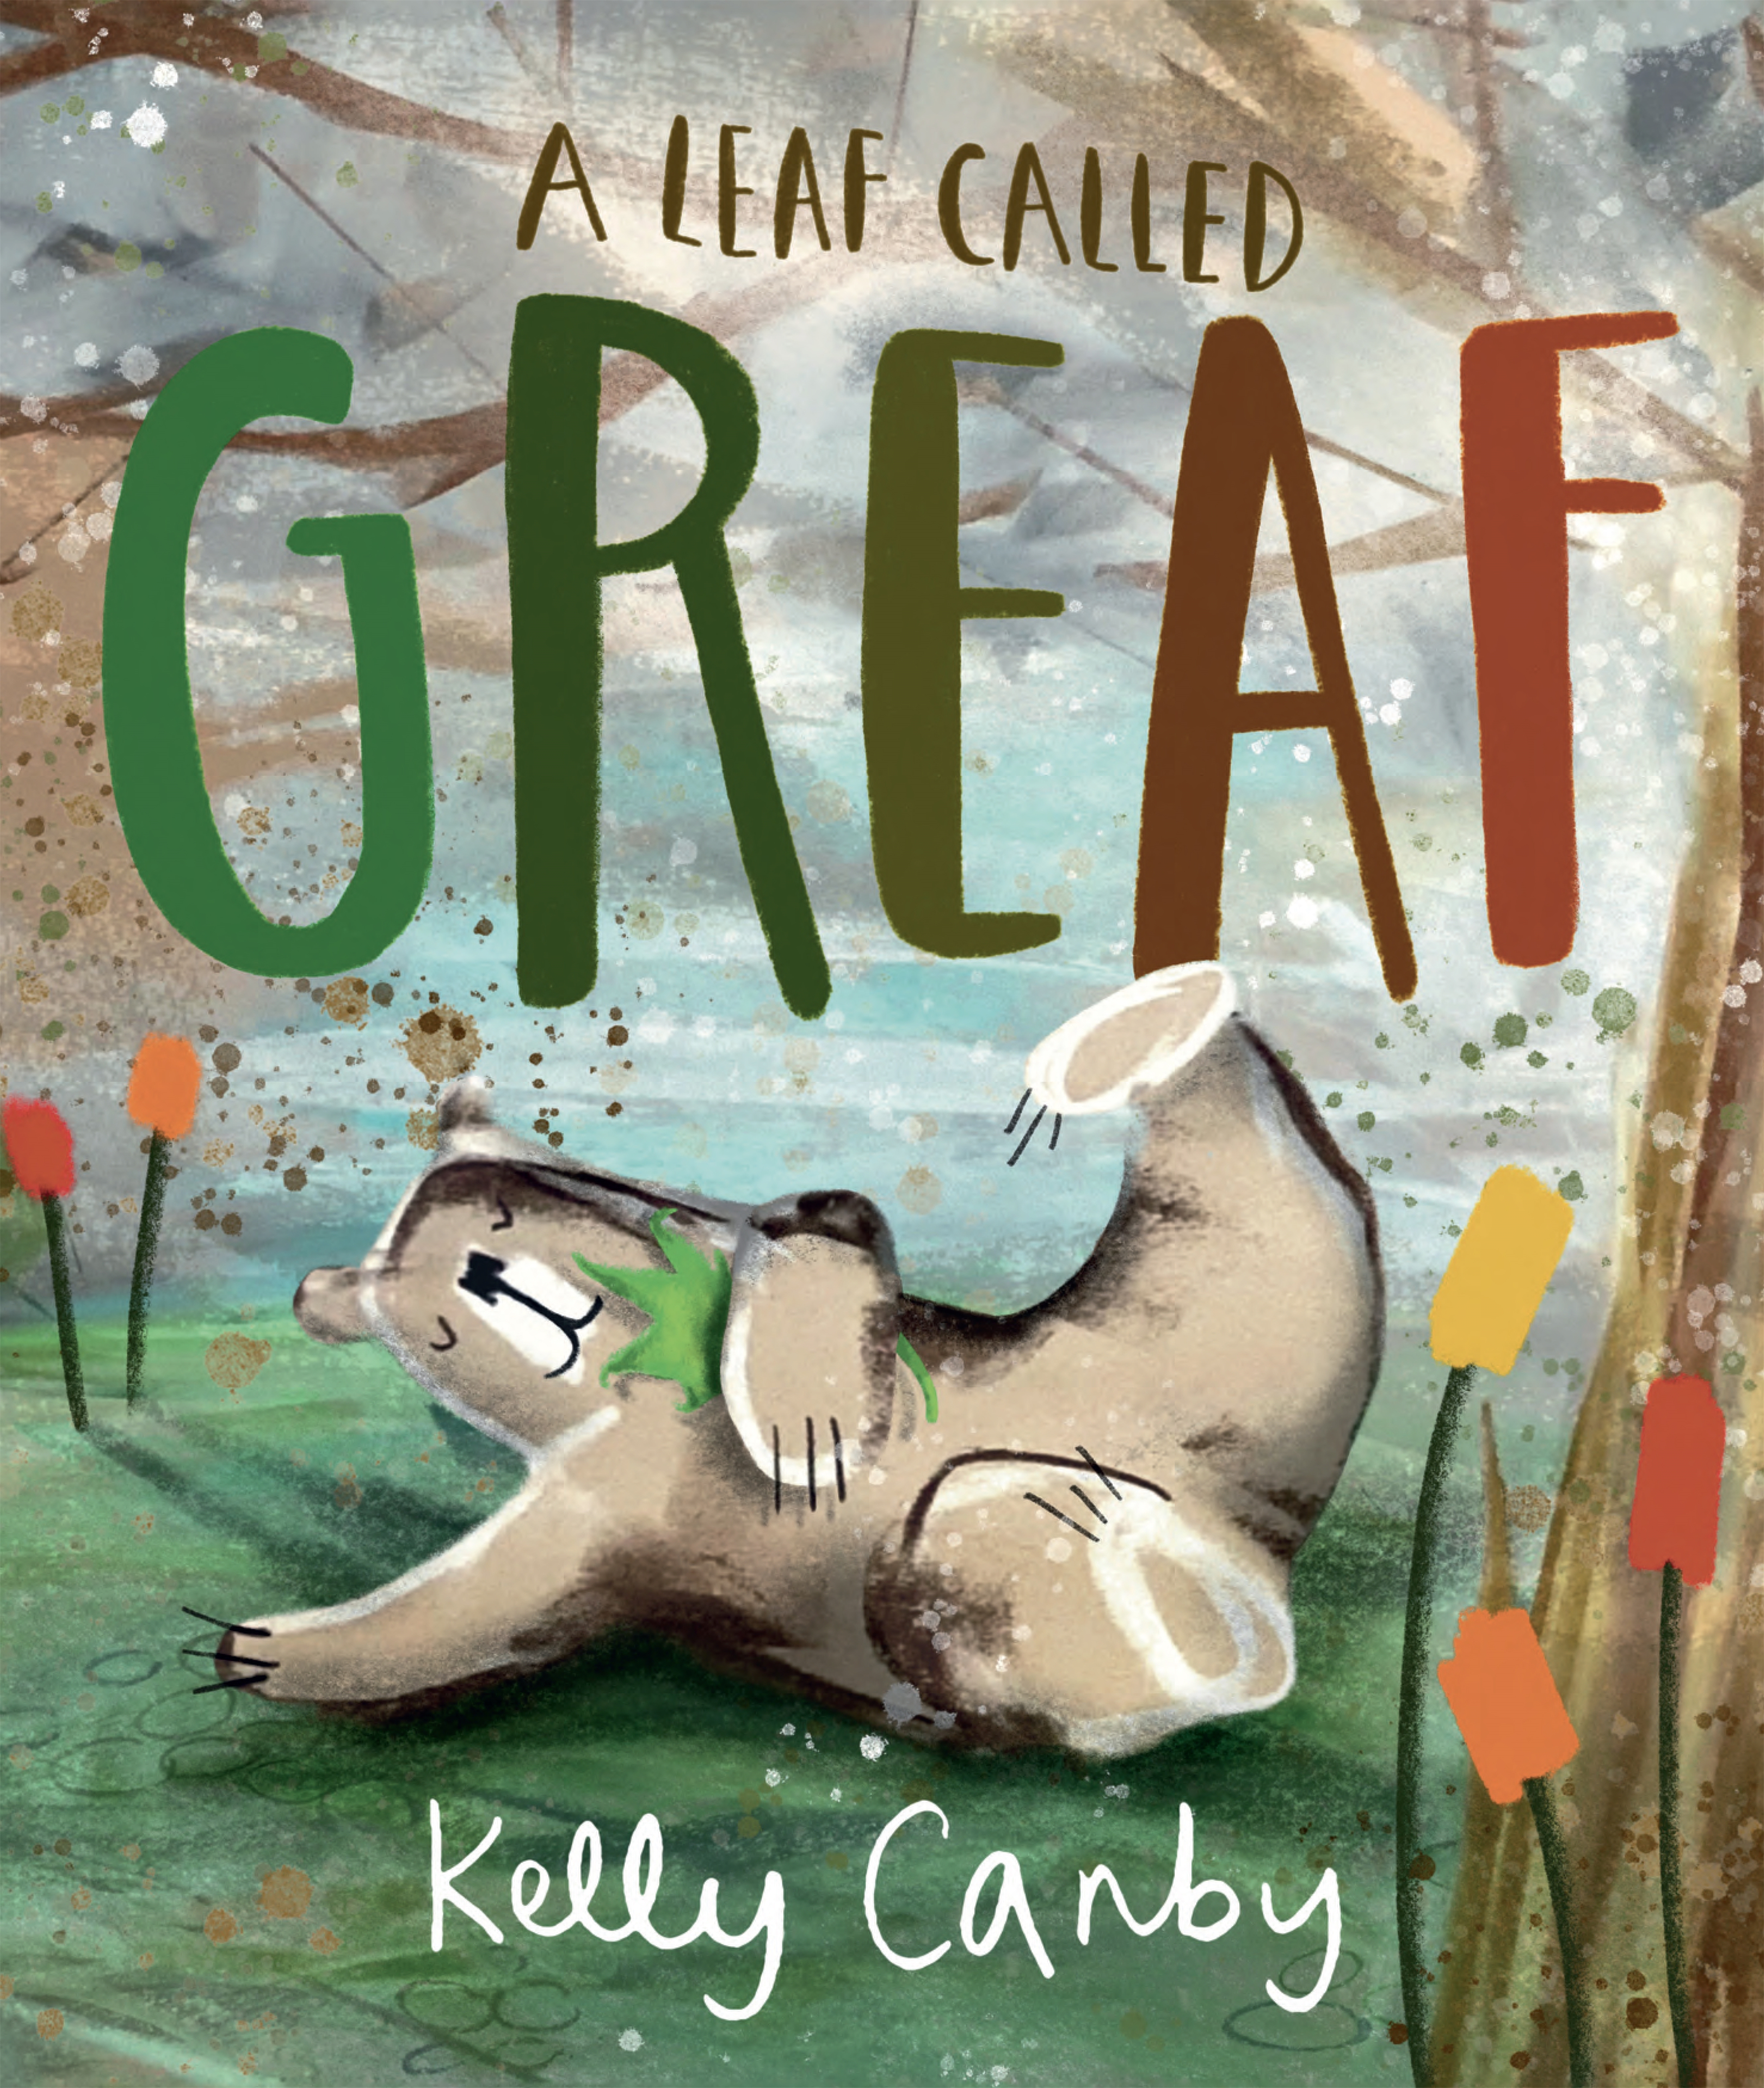 A Leaf Called Greaf by Kelly Canby 